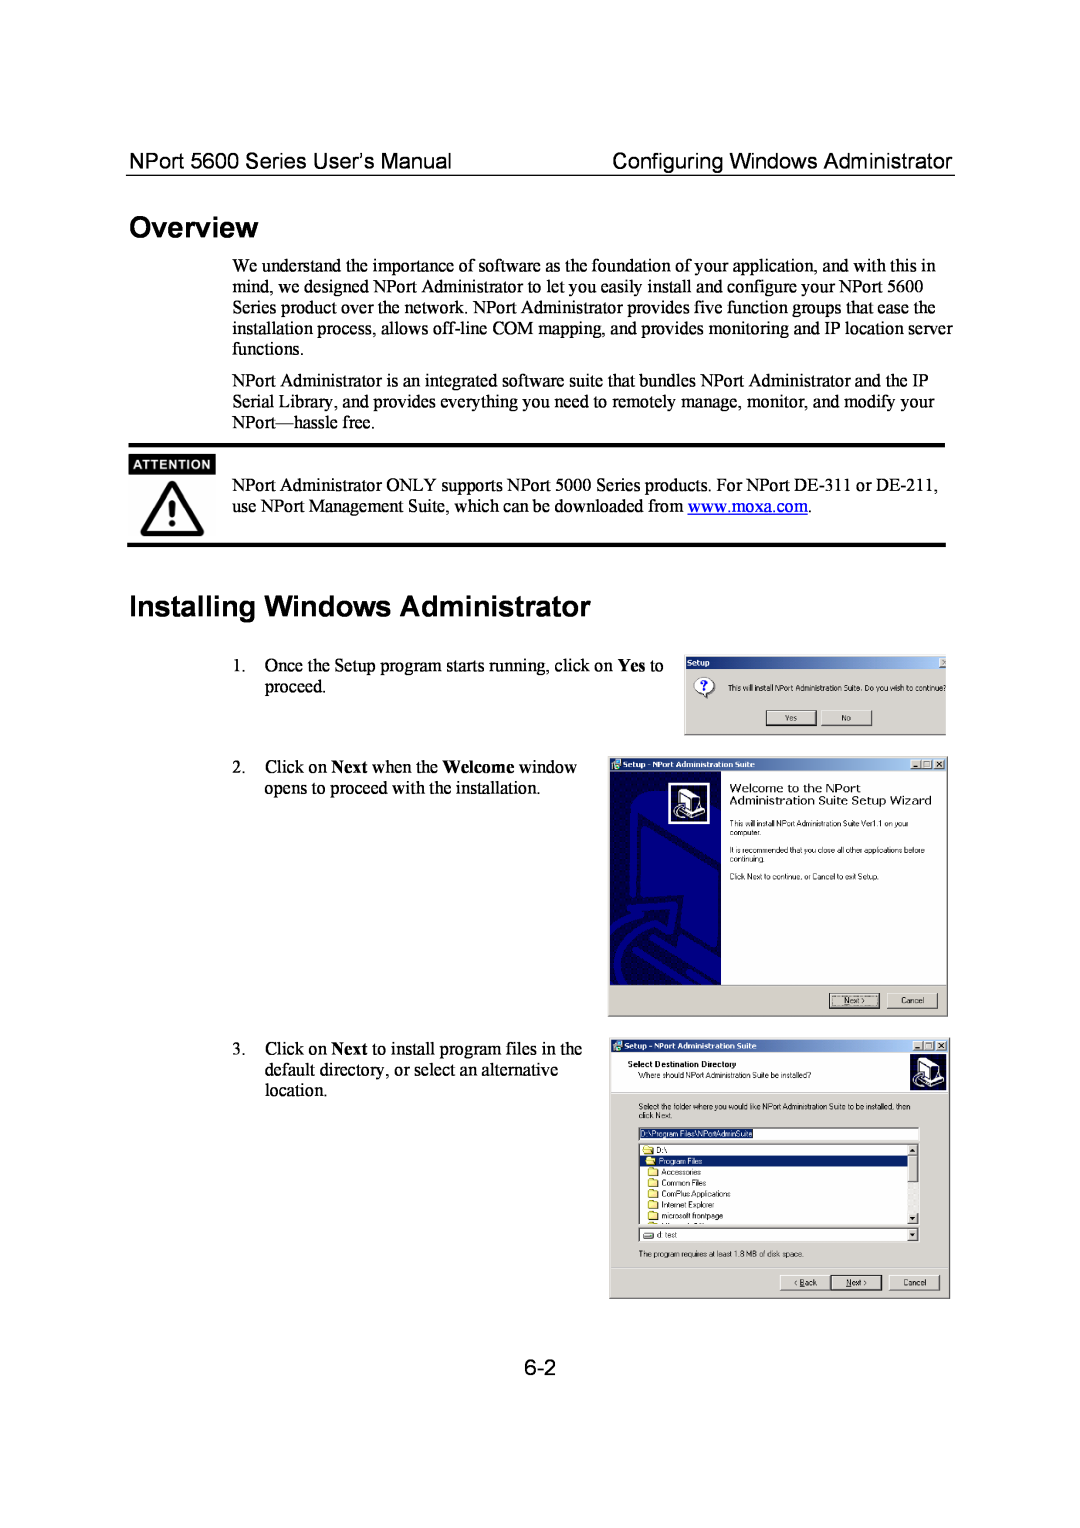 Moxa Technologies 5600 user manual Installing Windows Administrator, Configuring Windows Administrator, Overview 